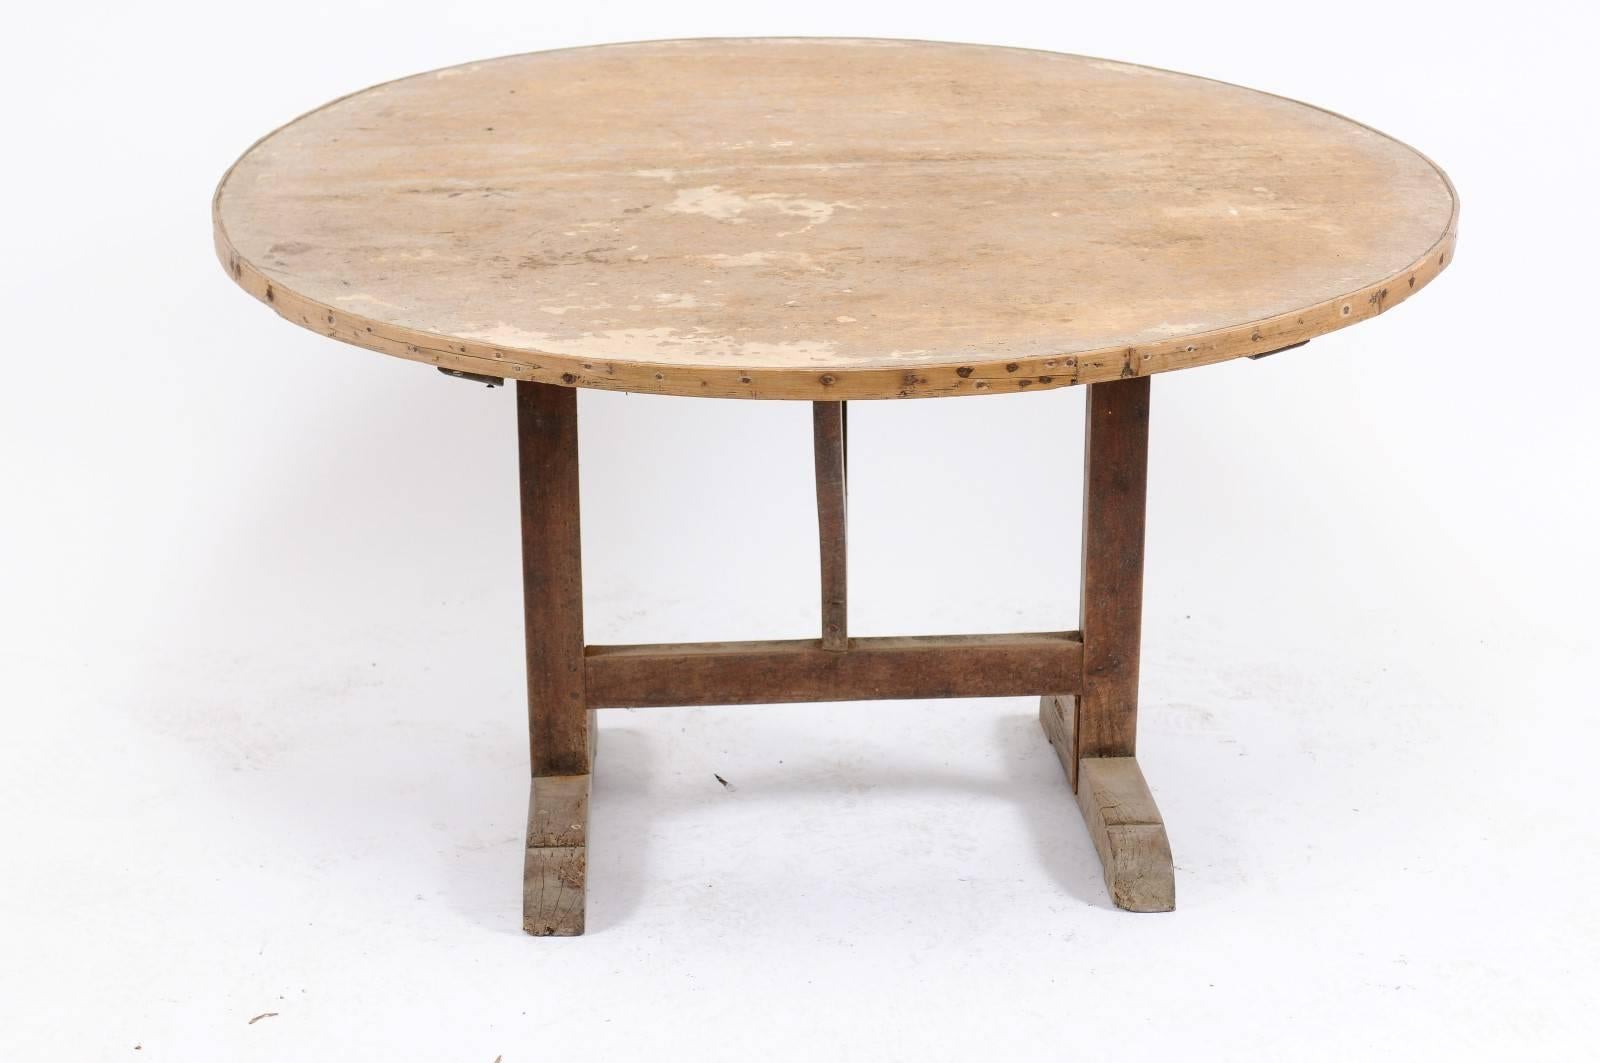 Rustic Southern French Round Wine Tasting Table with Tapestry Remnants, circa 1920